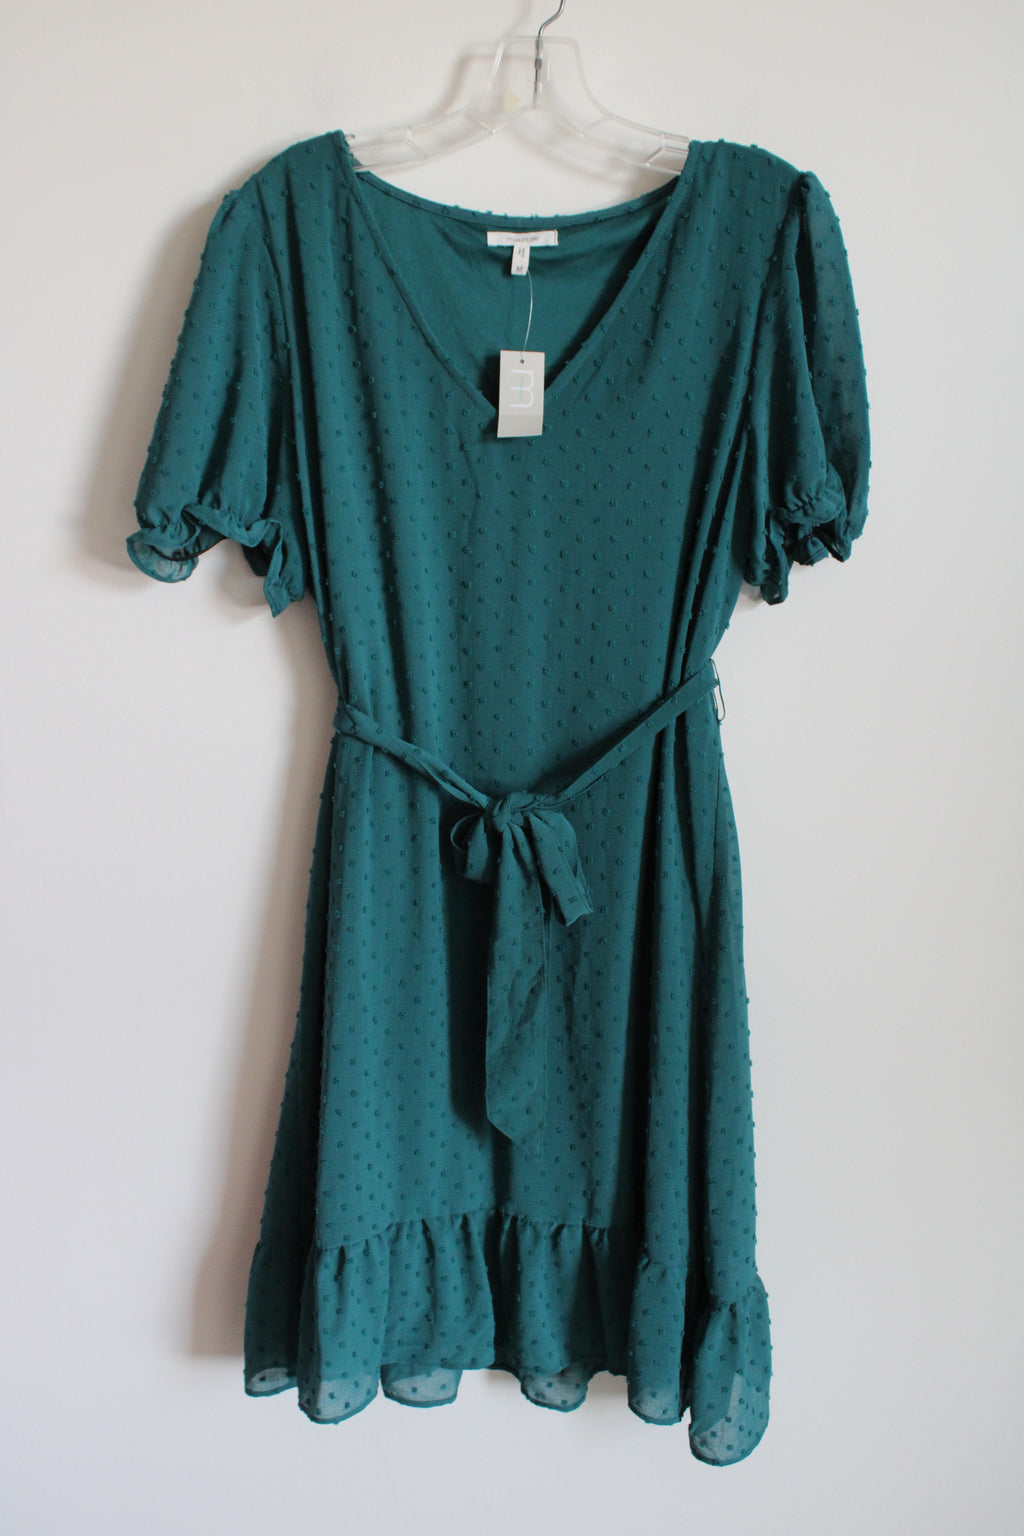 NEW Maurices Teal Green Swiss Dotted Dress | M